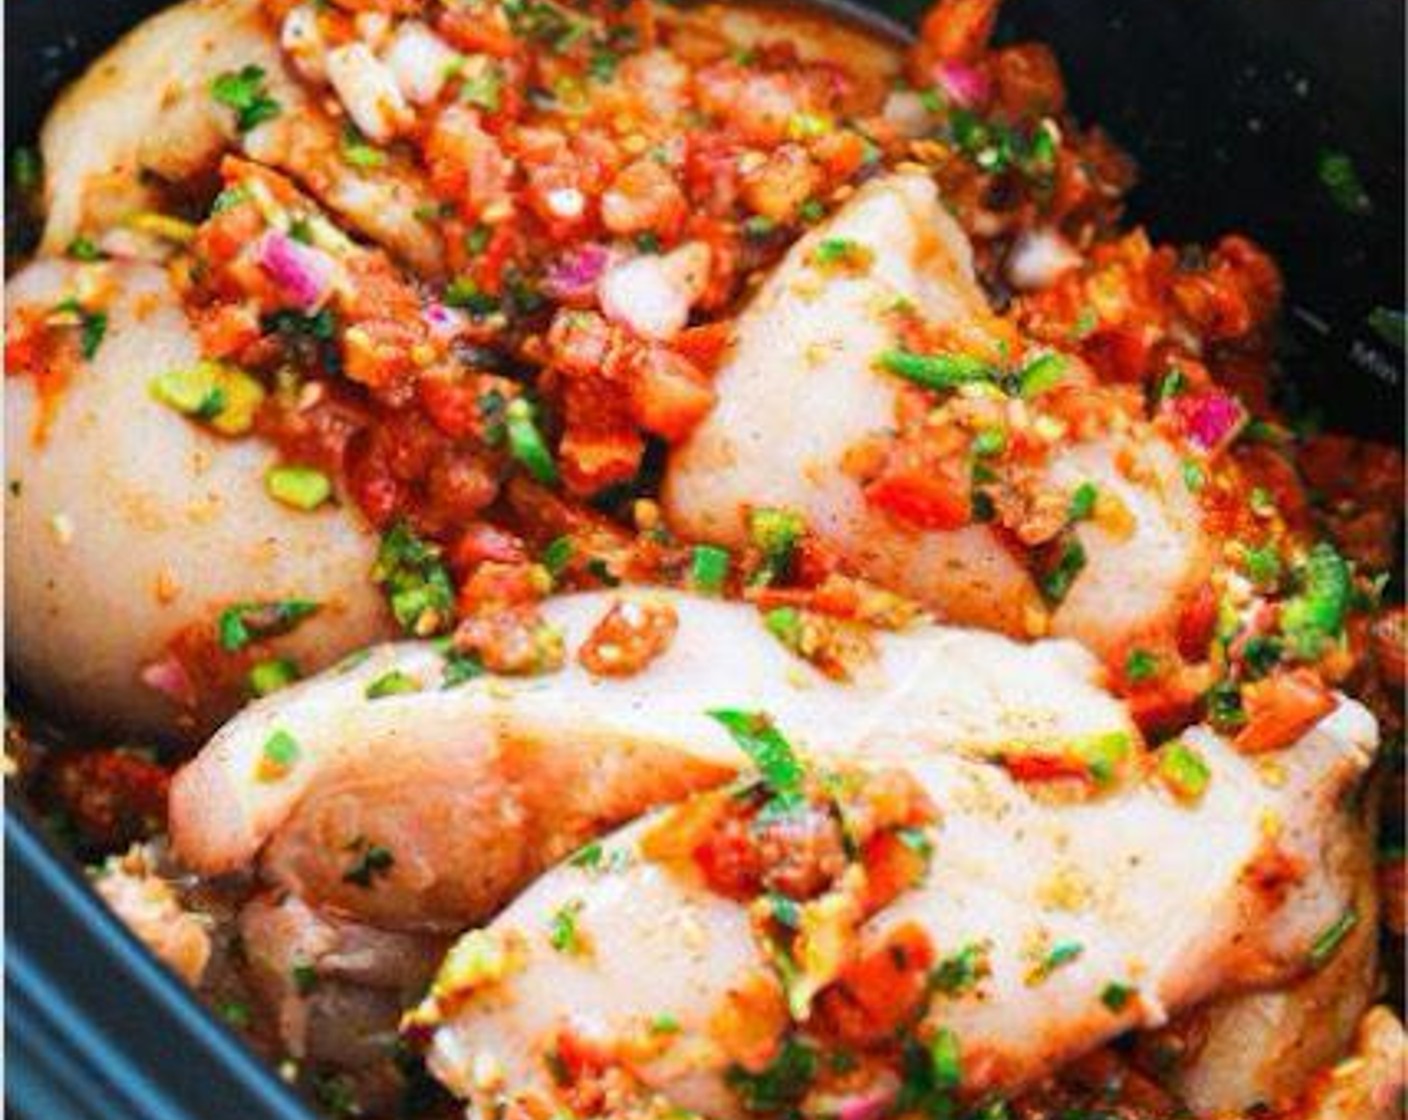 step 1 In a slow cooker, mix together the Medium Salsa (2 2/3 cups), Lime (1), Fresh Cilantro (1/4 cup), McCormick® Taco Seasoning Mix (1/4 cup) and Jalapeño Peppers (2). Add the Boneless, Skinless Chicken Breasts (6) and coat with the salsa mixture.